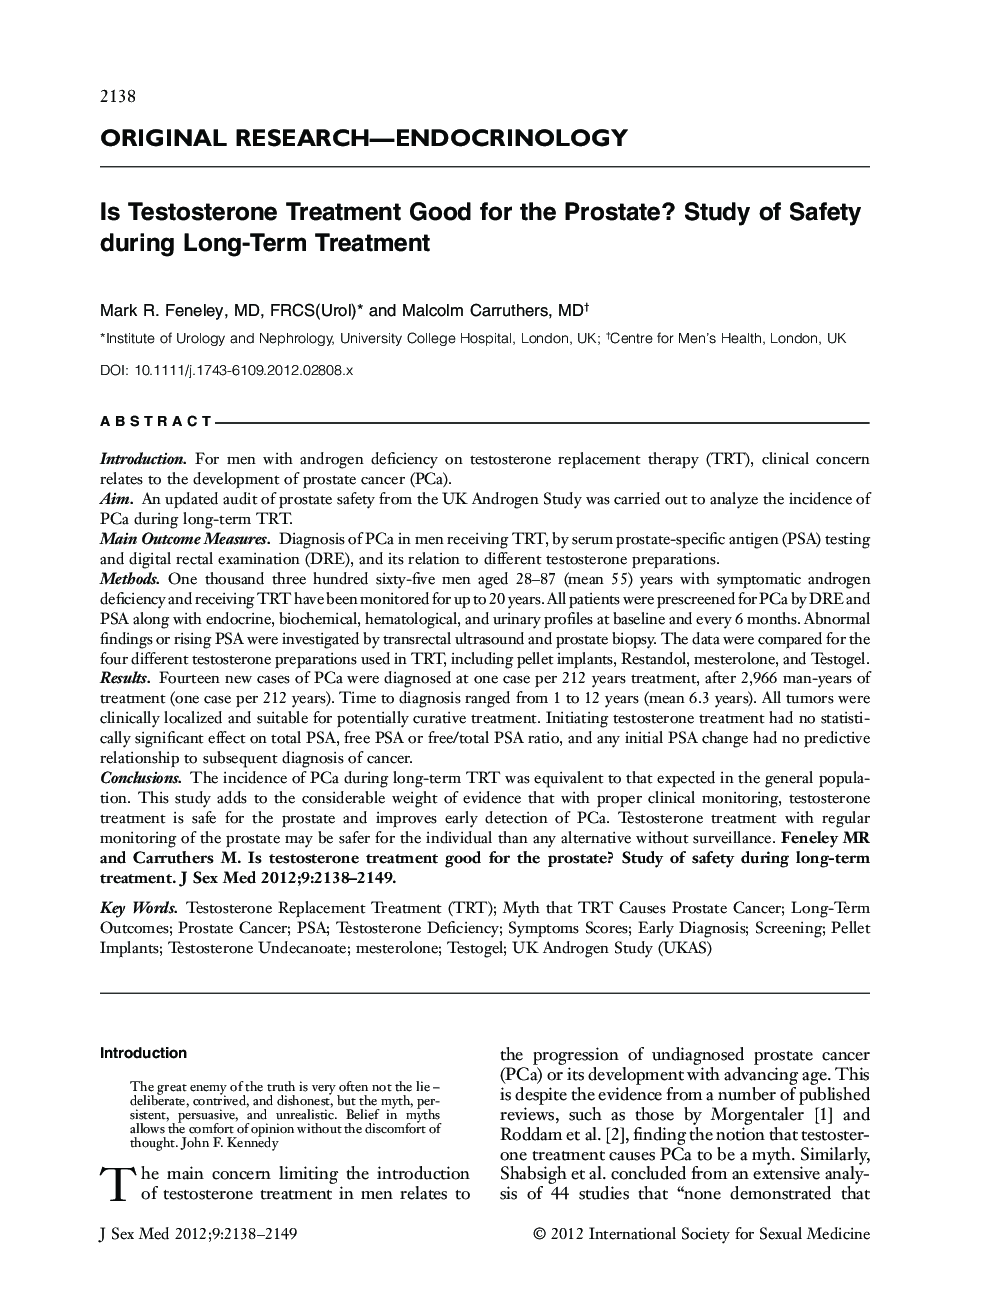 Is Testosterone Treatment Good for the Prostate? Study of Safety during Long‐Term Treatment